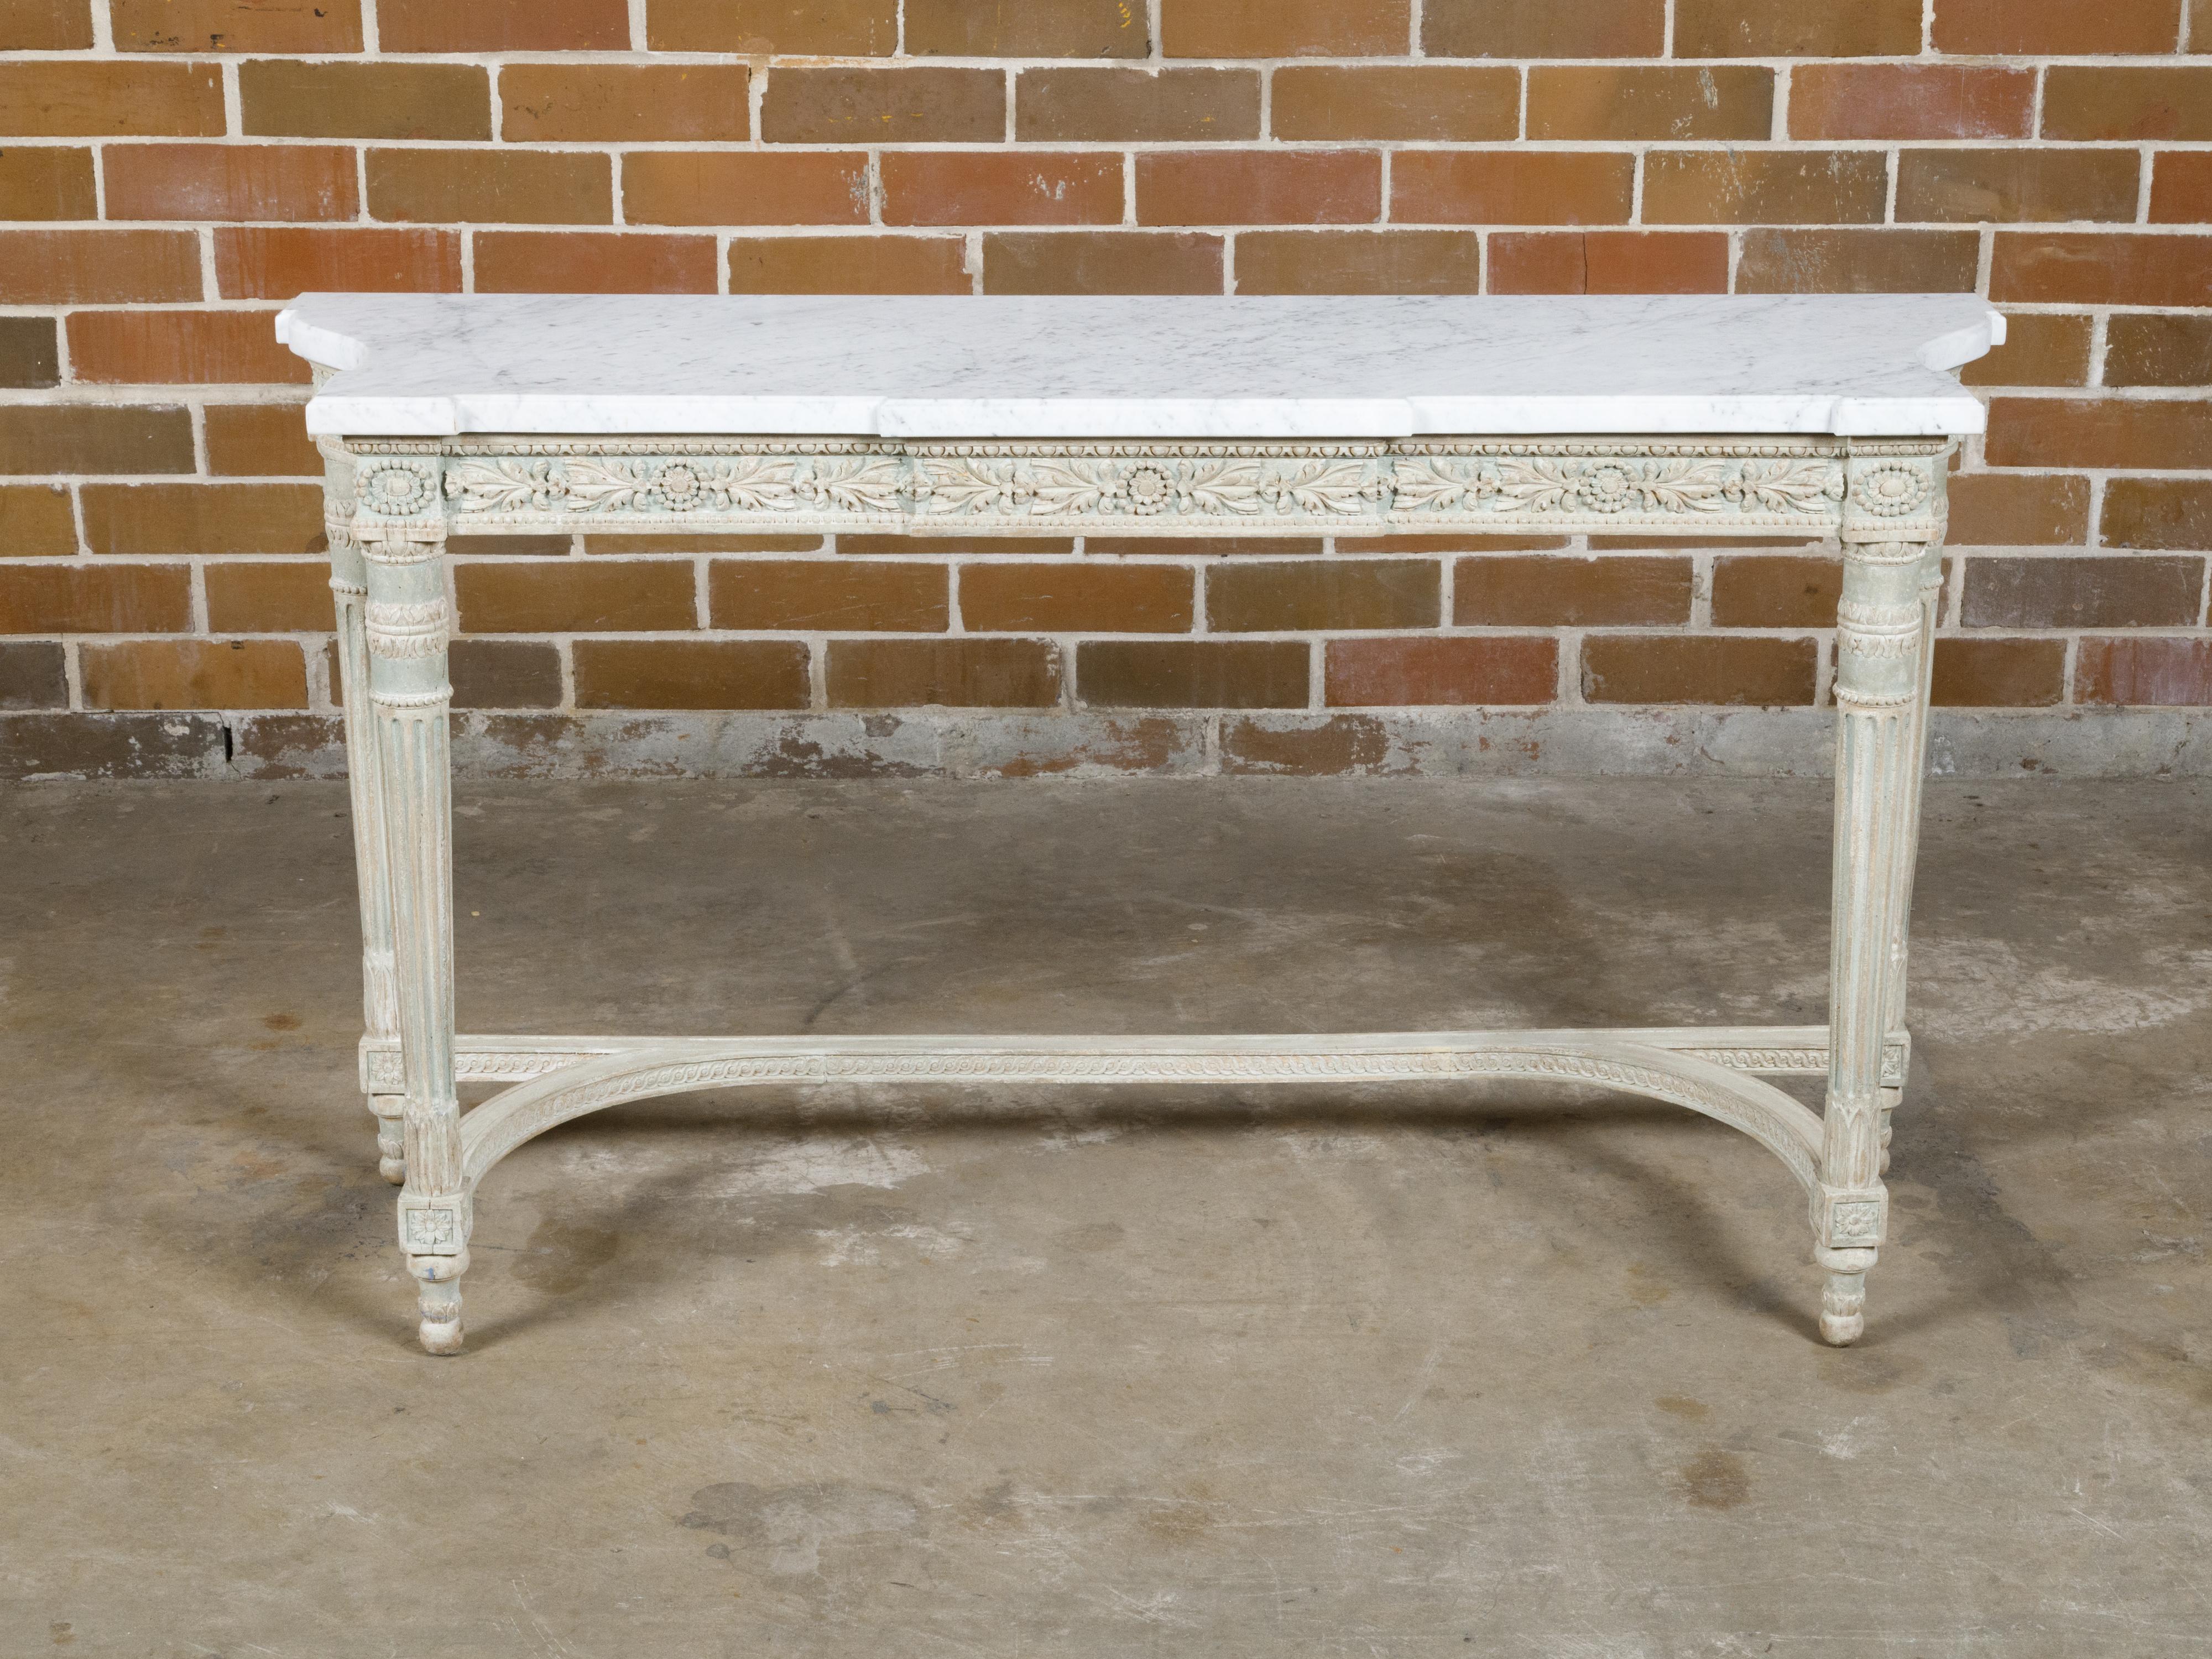 A French Neoclassical style painted console table from the 19th century with white veined marble top, carved apron and fluted legs. Immersed in the elegance of the French Neoclassical style, this 19th-century console table beautifully harmonizes